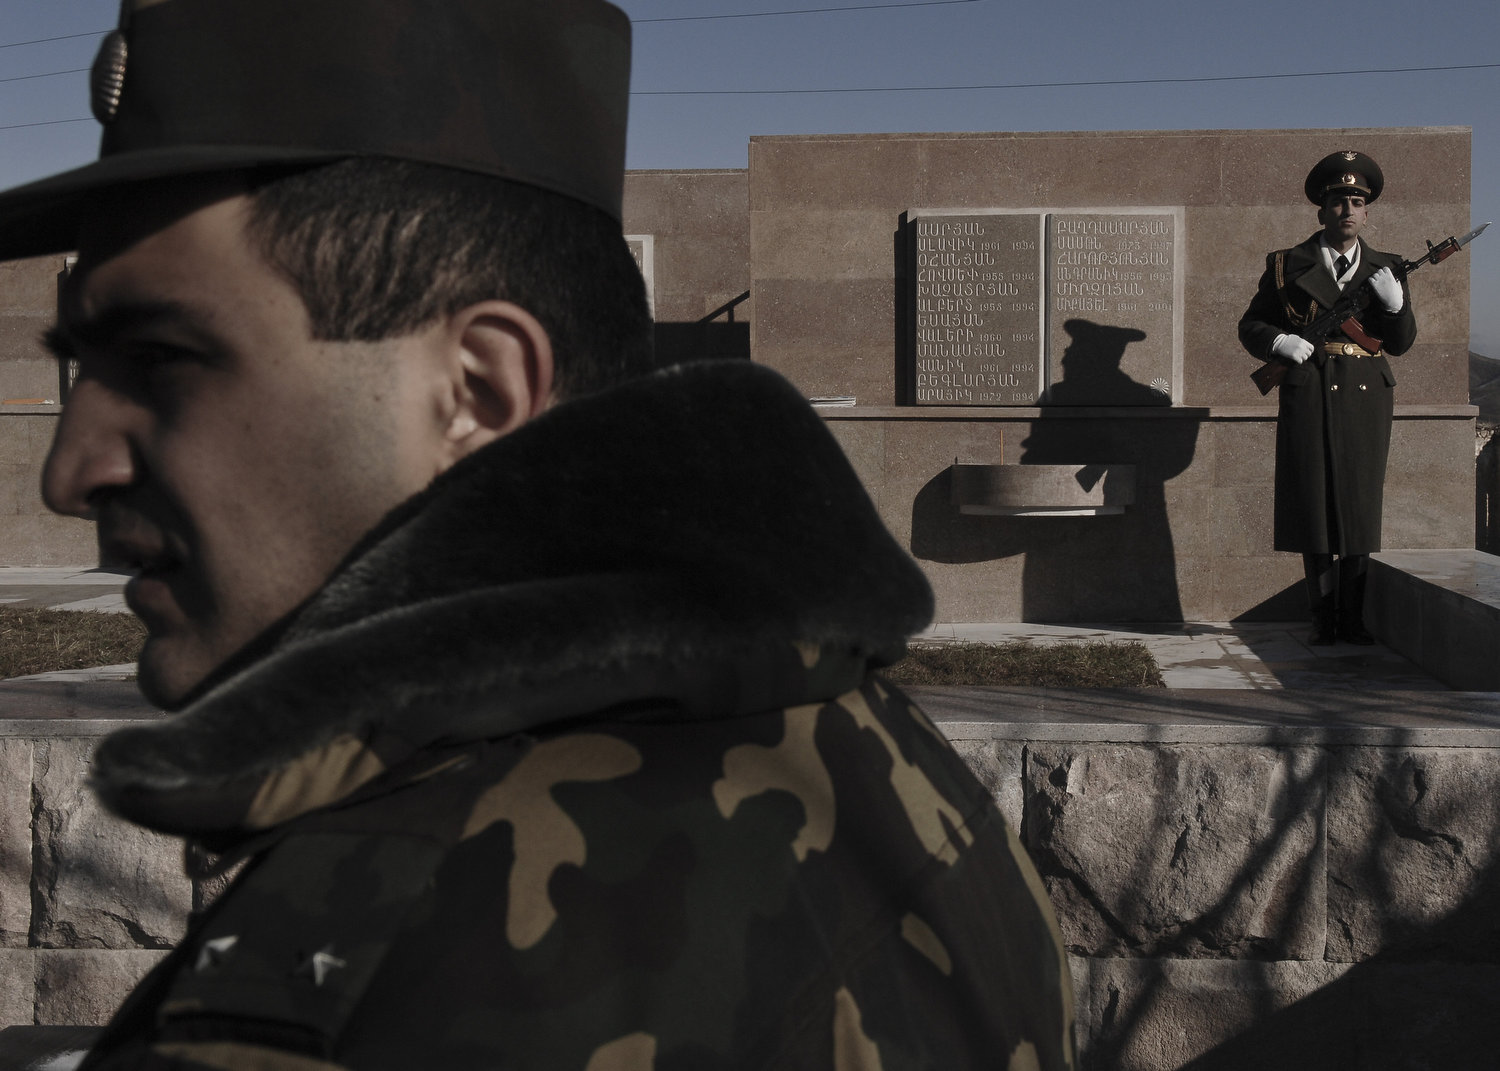 Karabakhi soldiers stand guard at a war memorial in Kharamort, a village that was once evenly populated by ethnic Azeris and Armenians. The village is now half the size since the Azeris fled and their homes were burned.